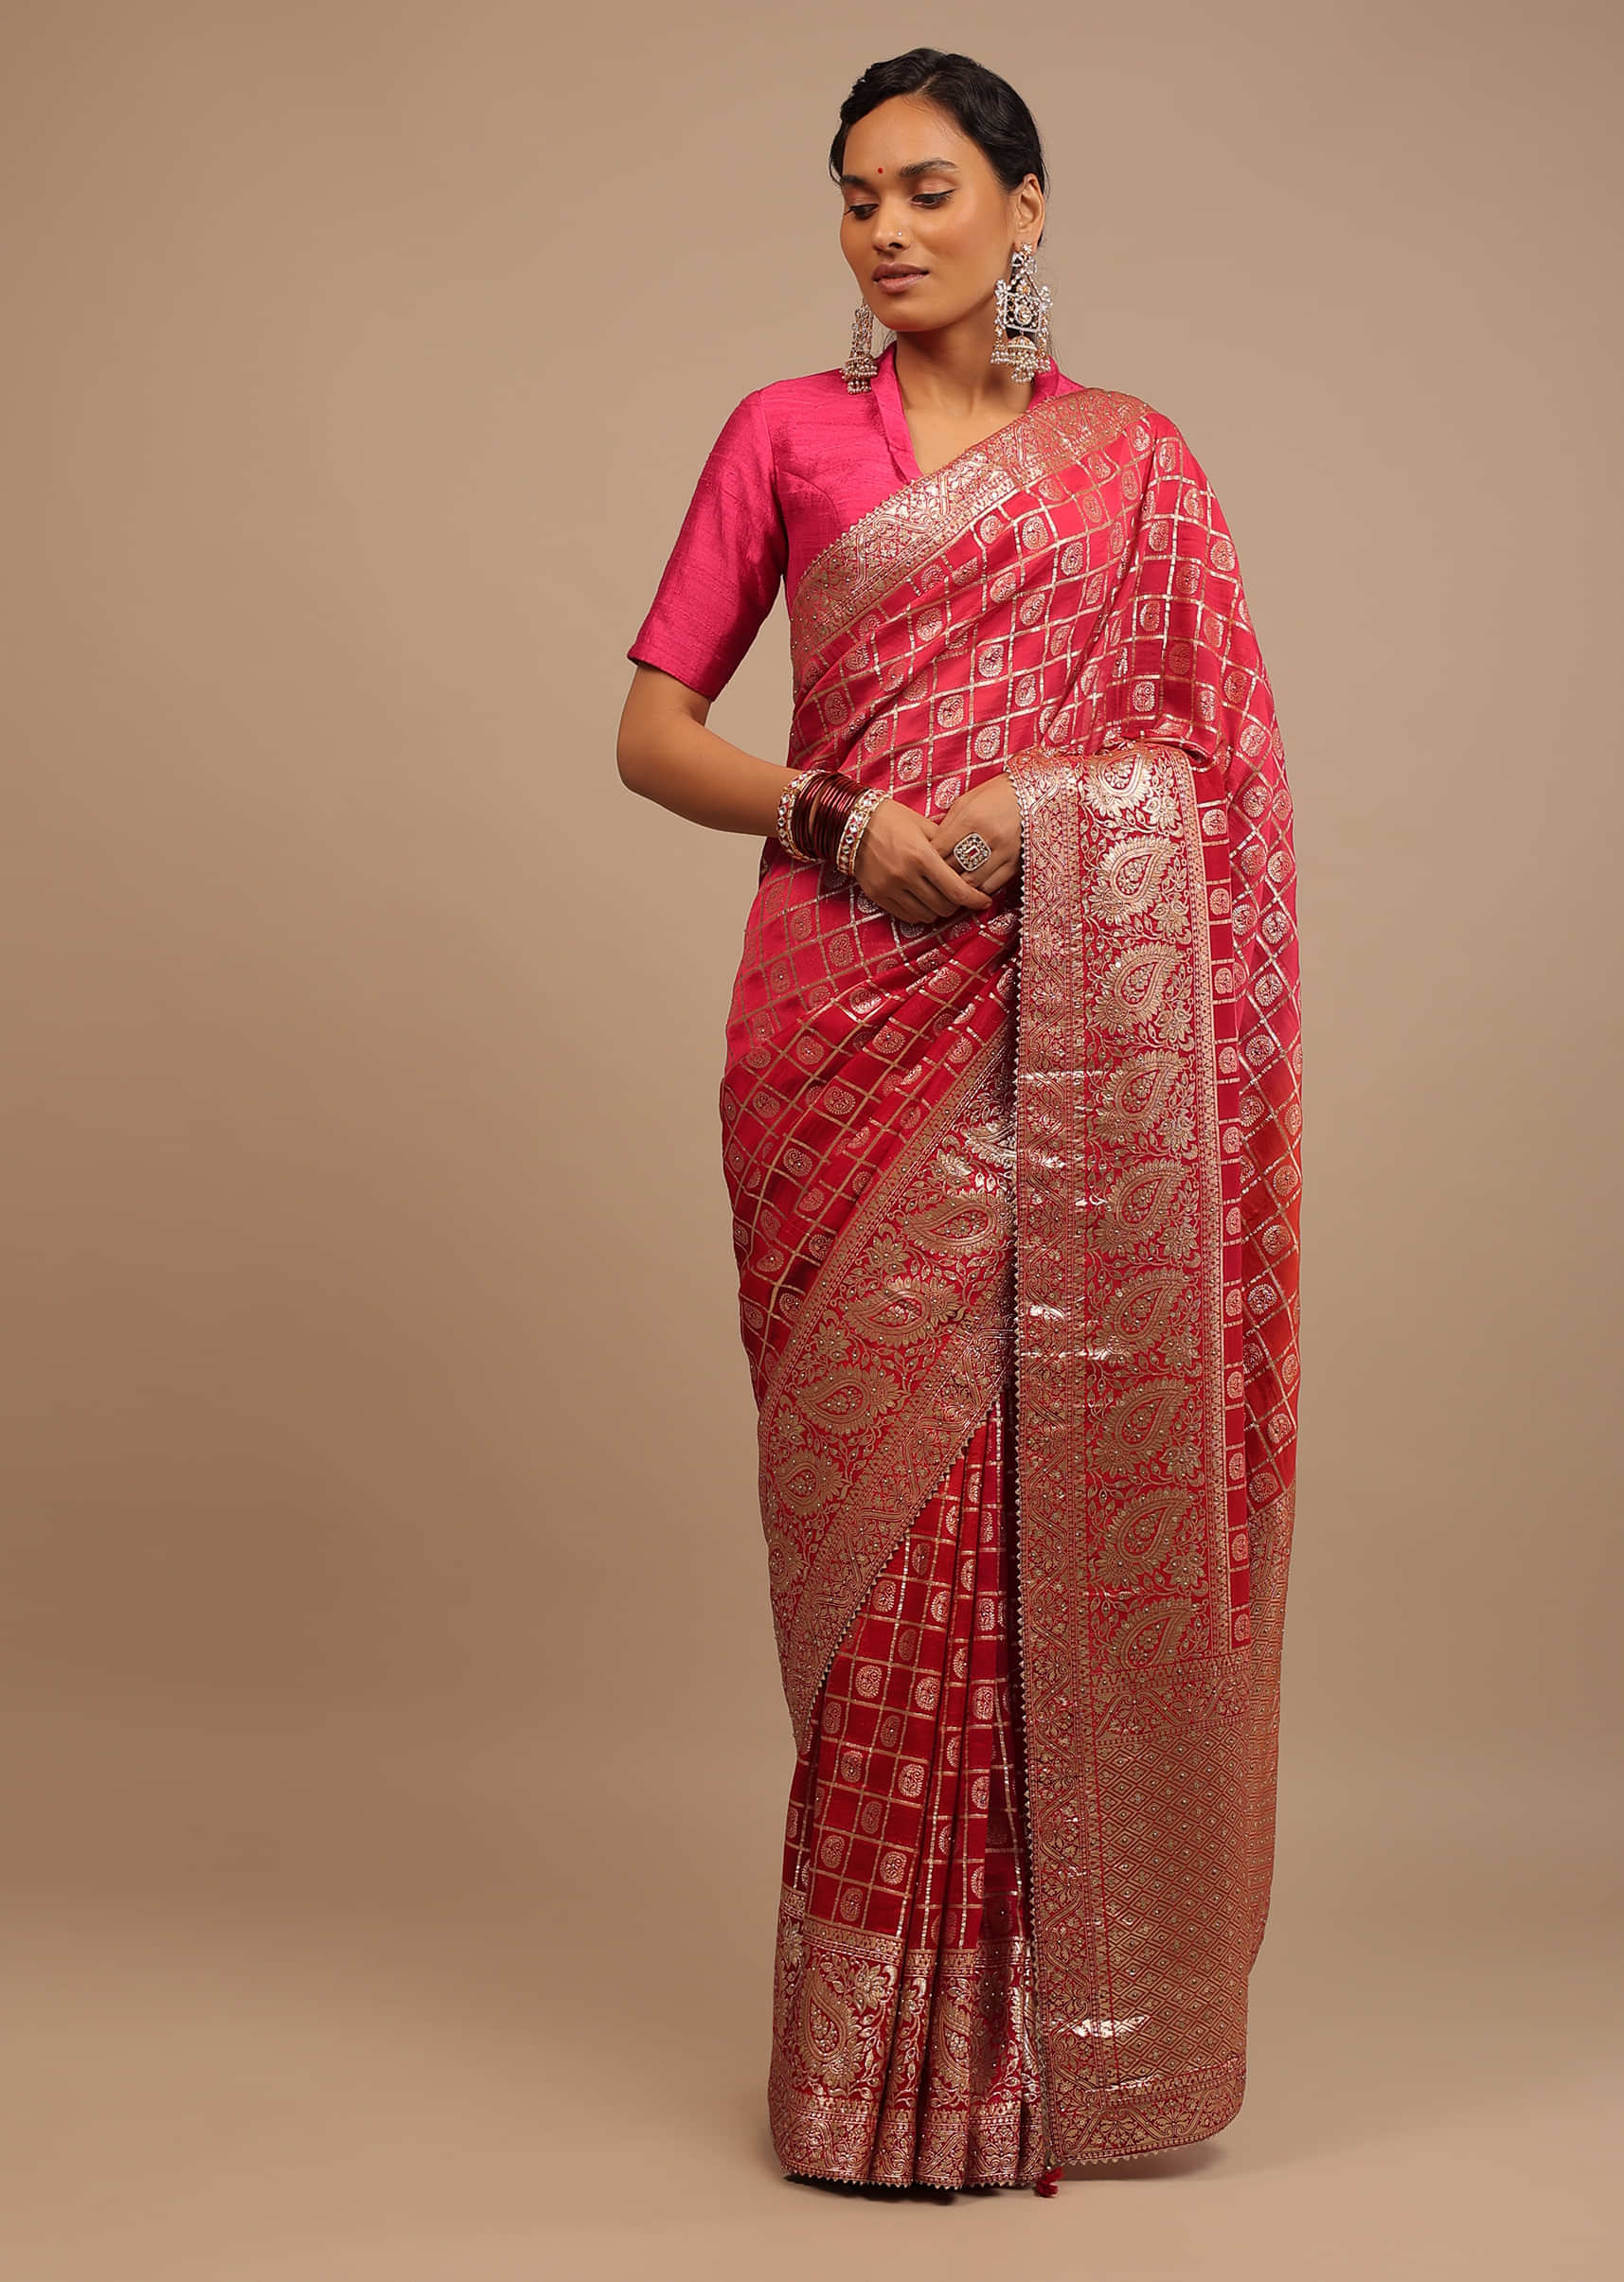 Rani Pink, Red And Orange Ombre Saree In Silk With Lurex Woven Checks And Paisley Motifs